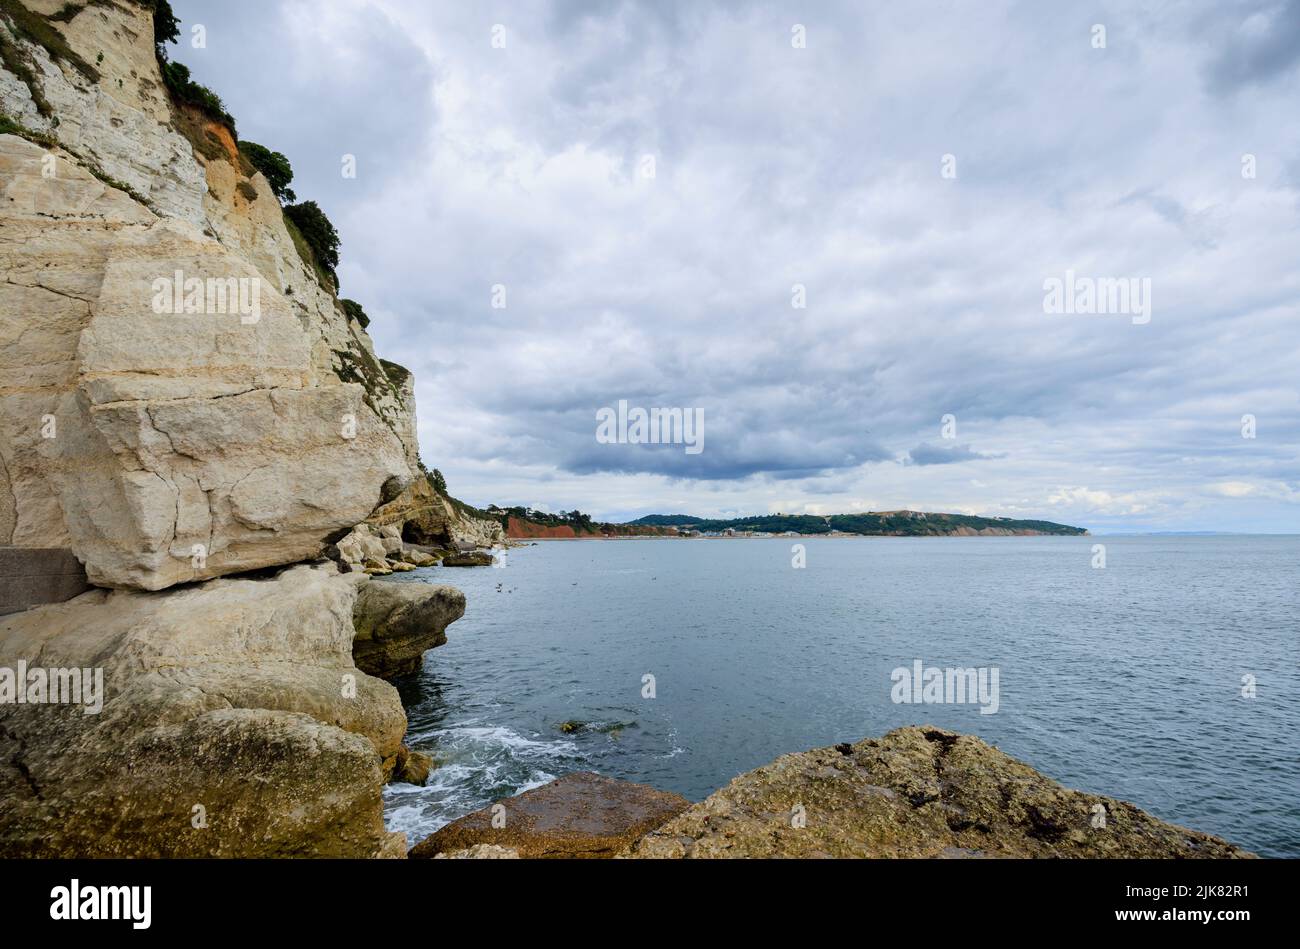 Cliffs and coastline view west towards Seaton from Beer, a small coastal village on Lyme Bay in the Jurassic Coast of East Dorset, south-west England Stock Photo